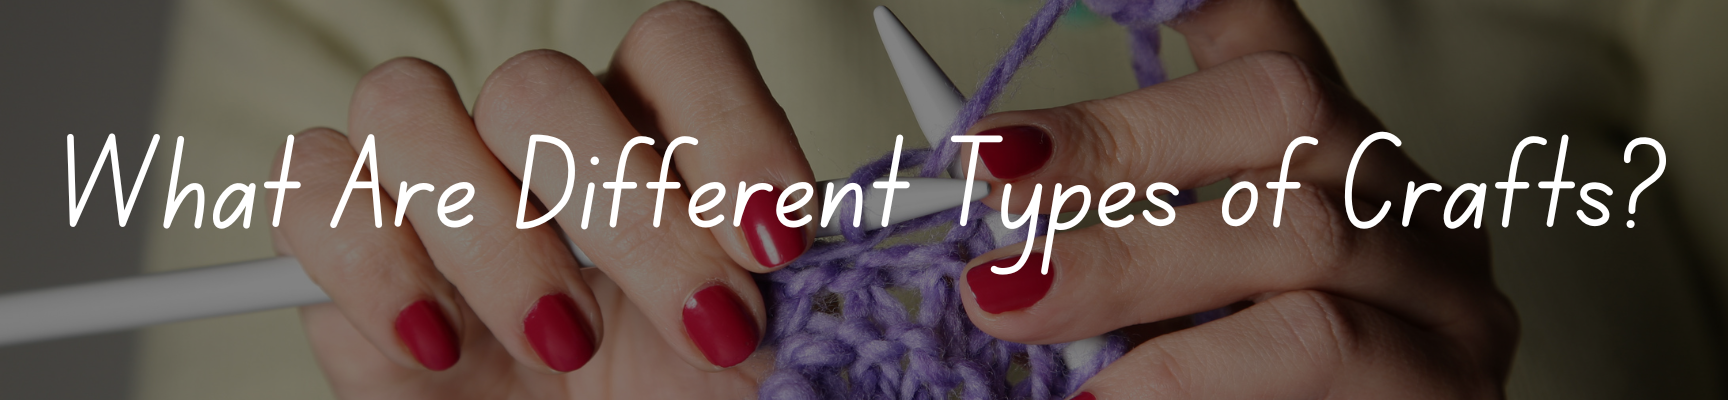 What Are Different Types of Crafts